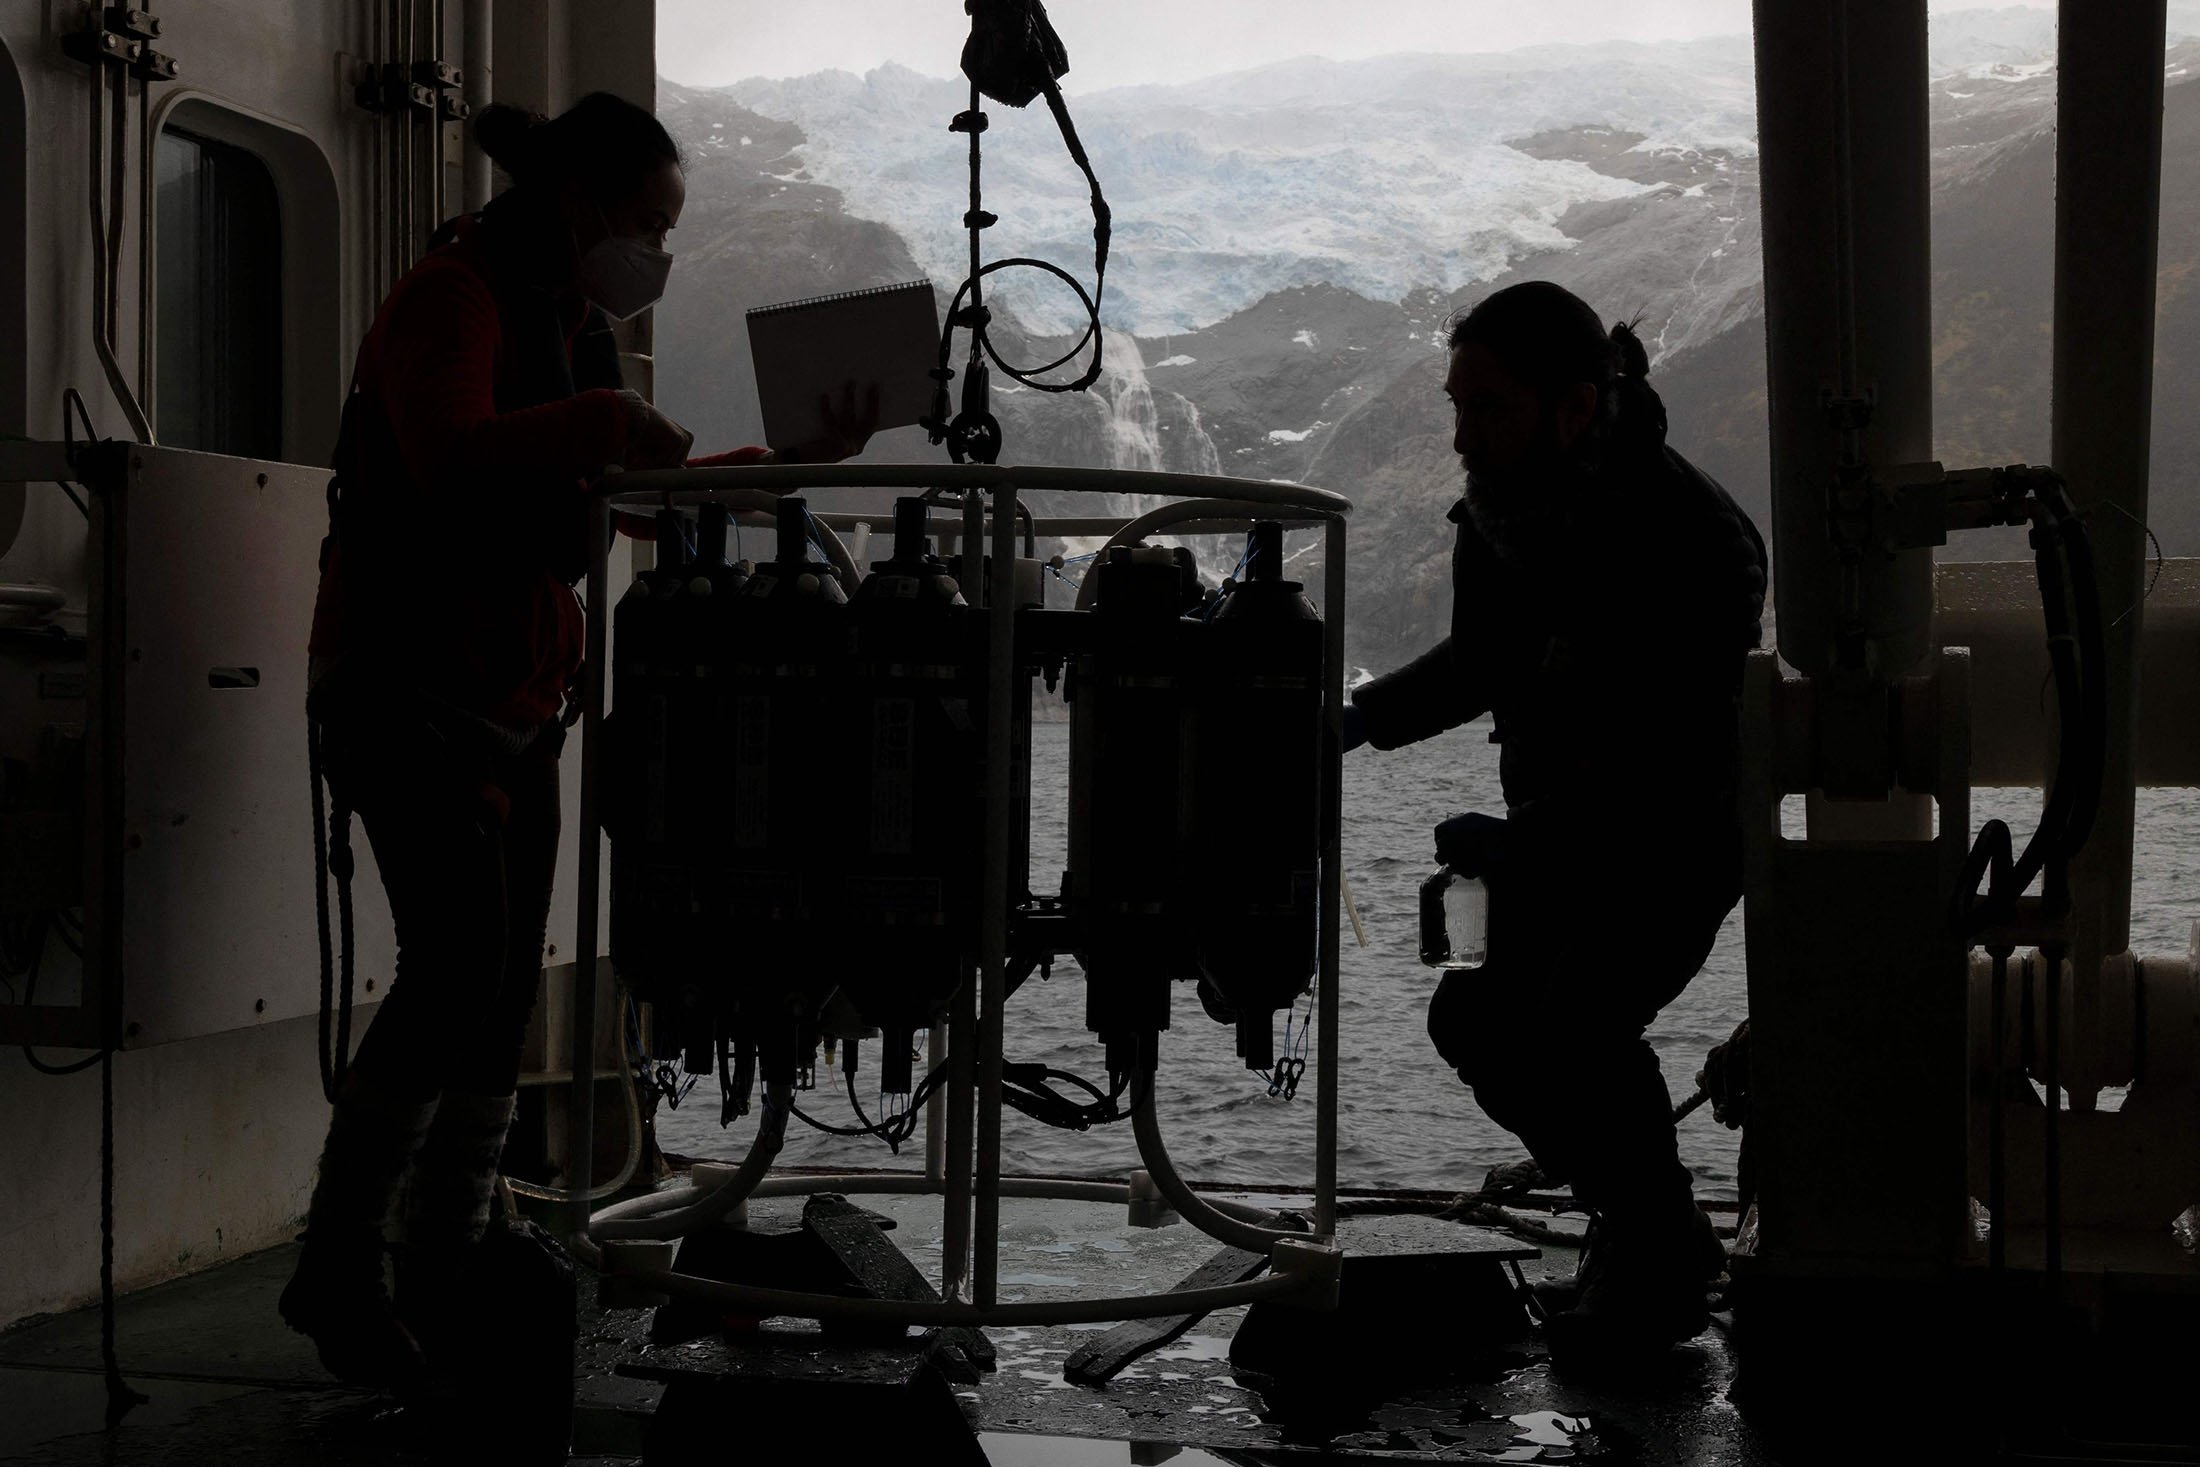 Marine biologist Emilio Alarcon (R) takes water collected by water sampling devices from the sea in the region of Magallanes, Chile, Nov. 28, 2021. (AFP Photo)